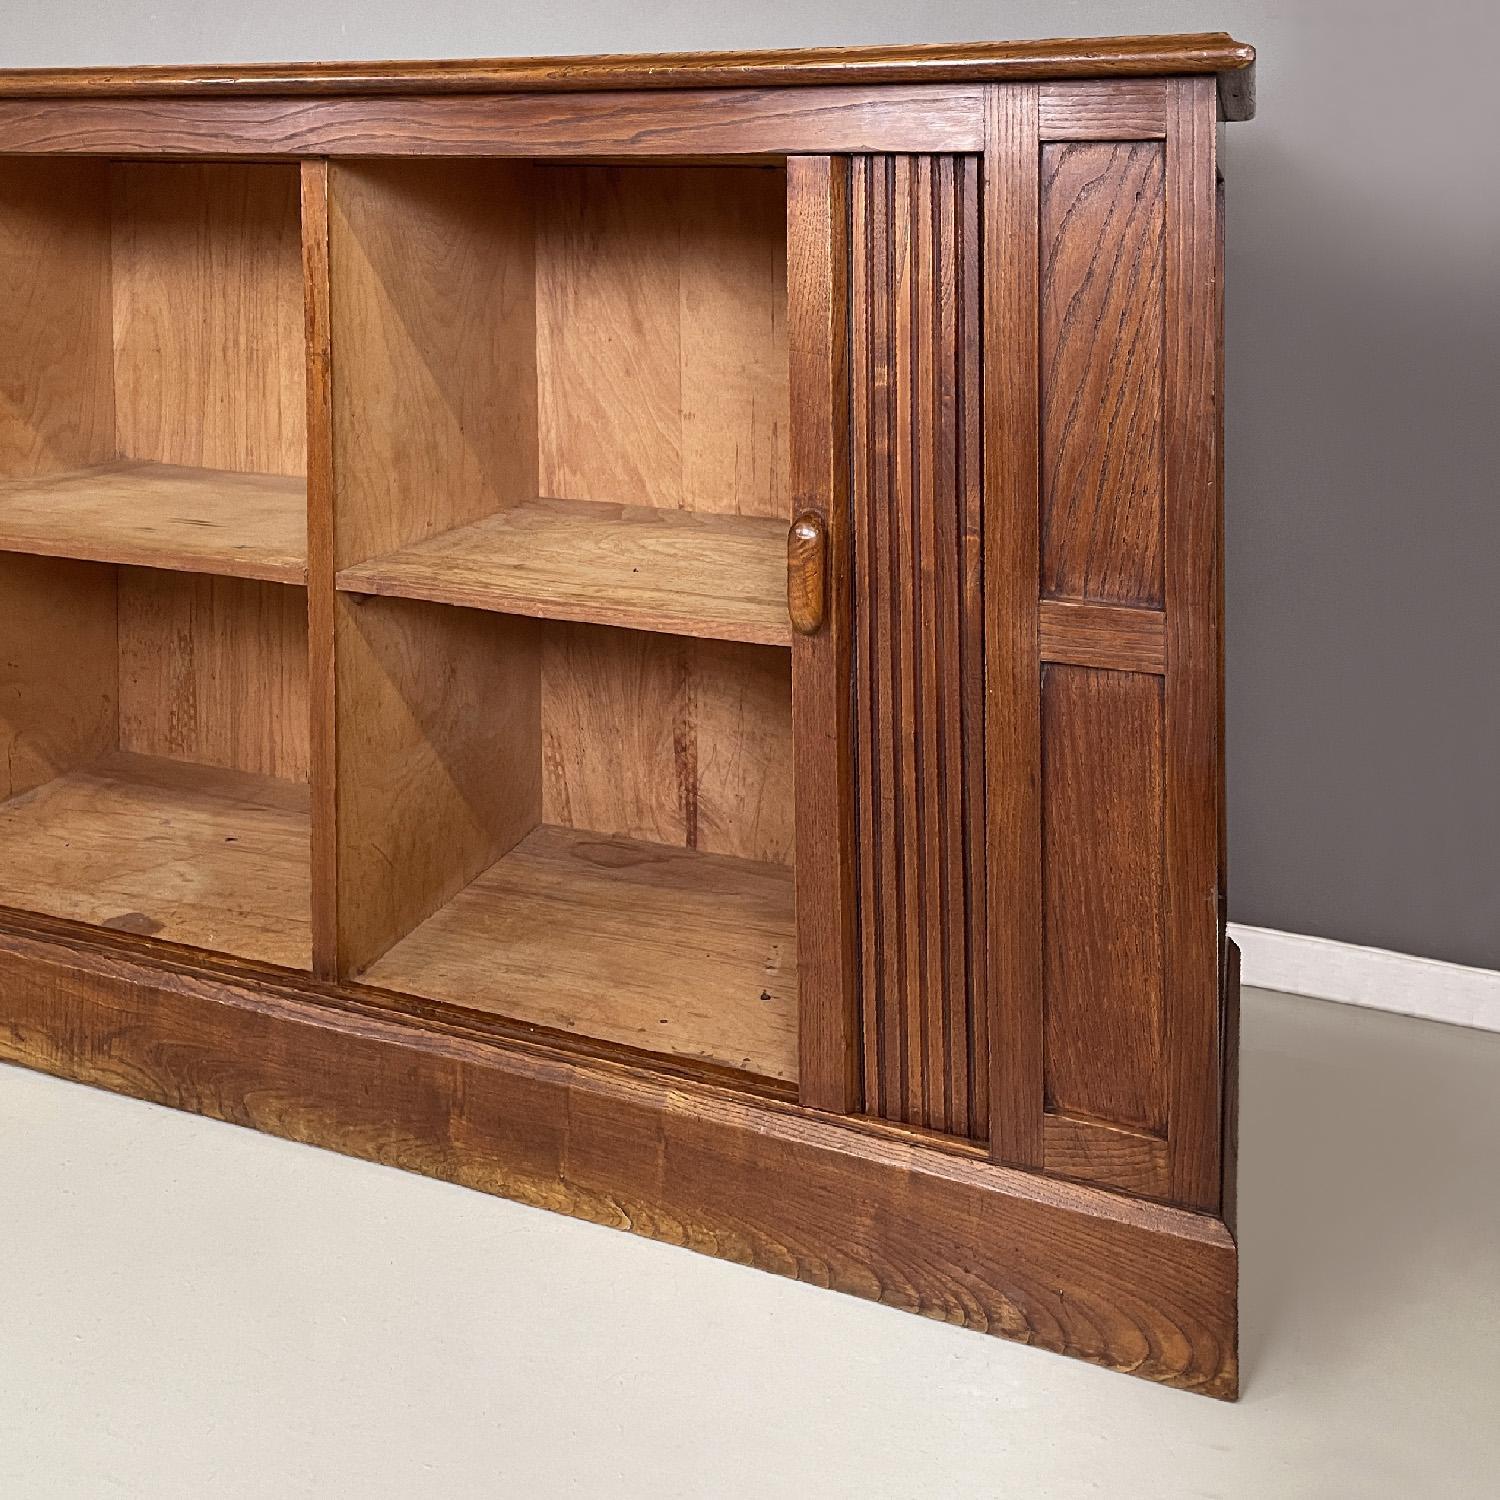 Italian Art Deco wooden sideboard with shutter opening, 1920s For Sale 8